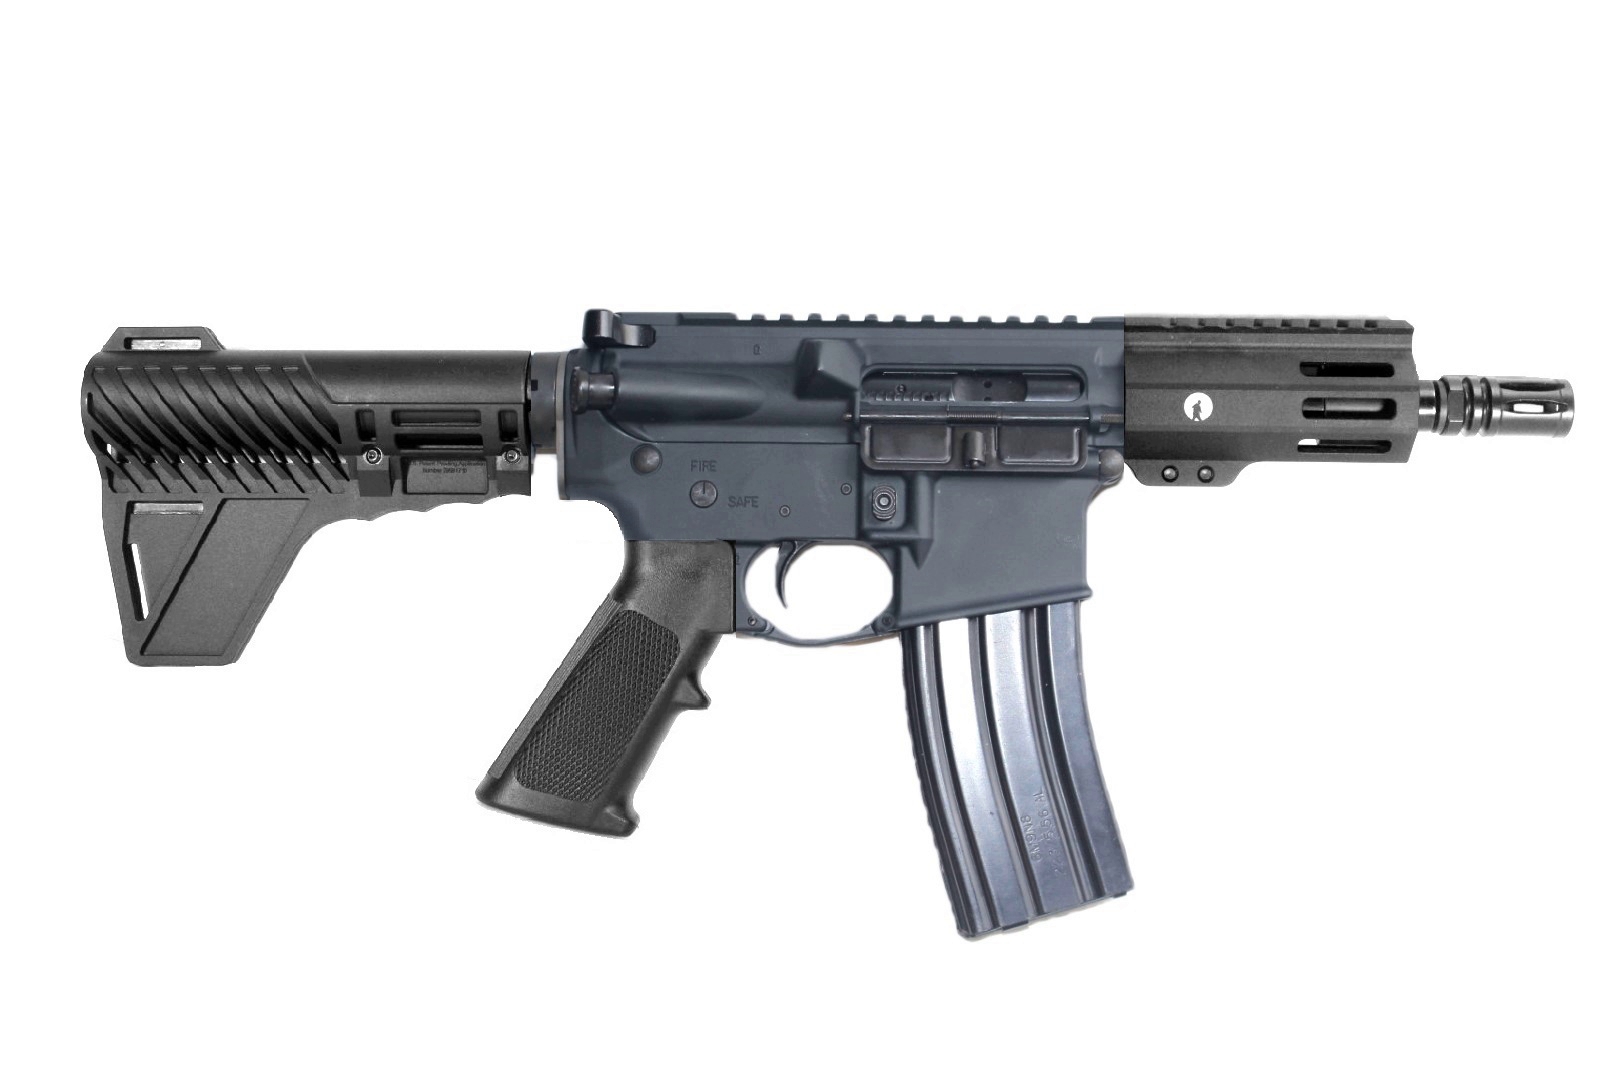 5 inch 300 Blackout AR Pistol | Shop Now and Save